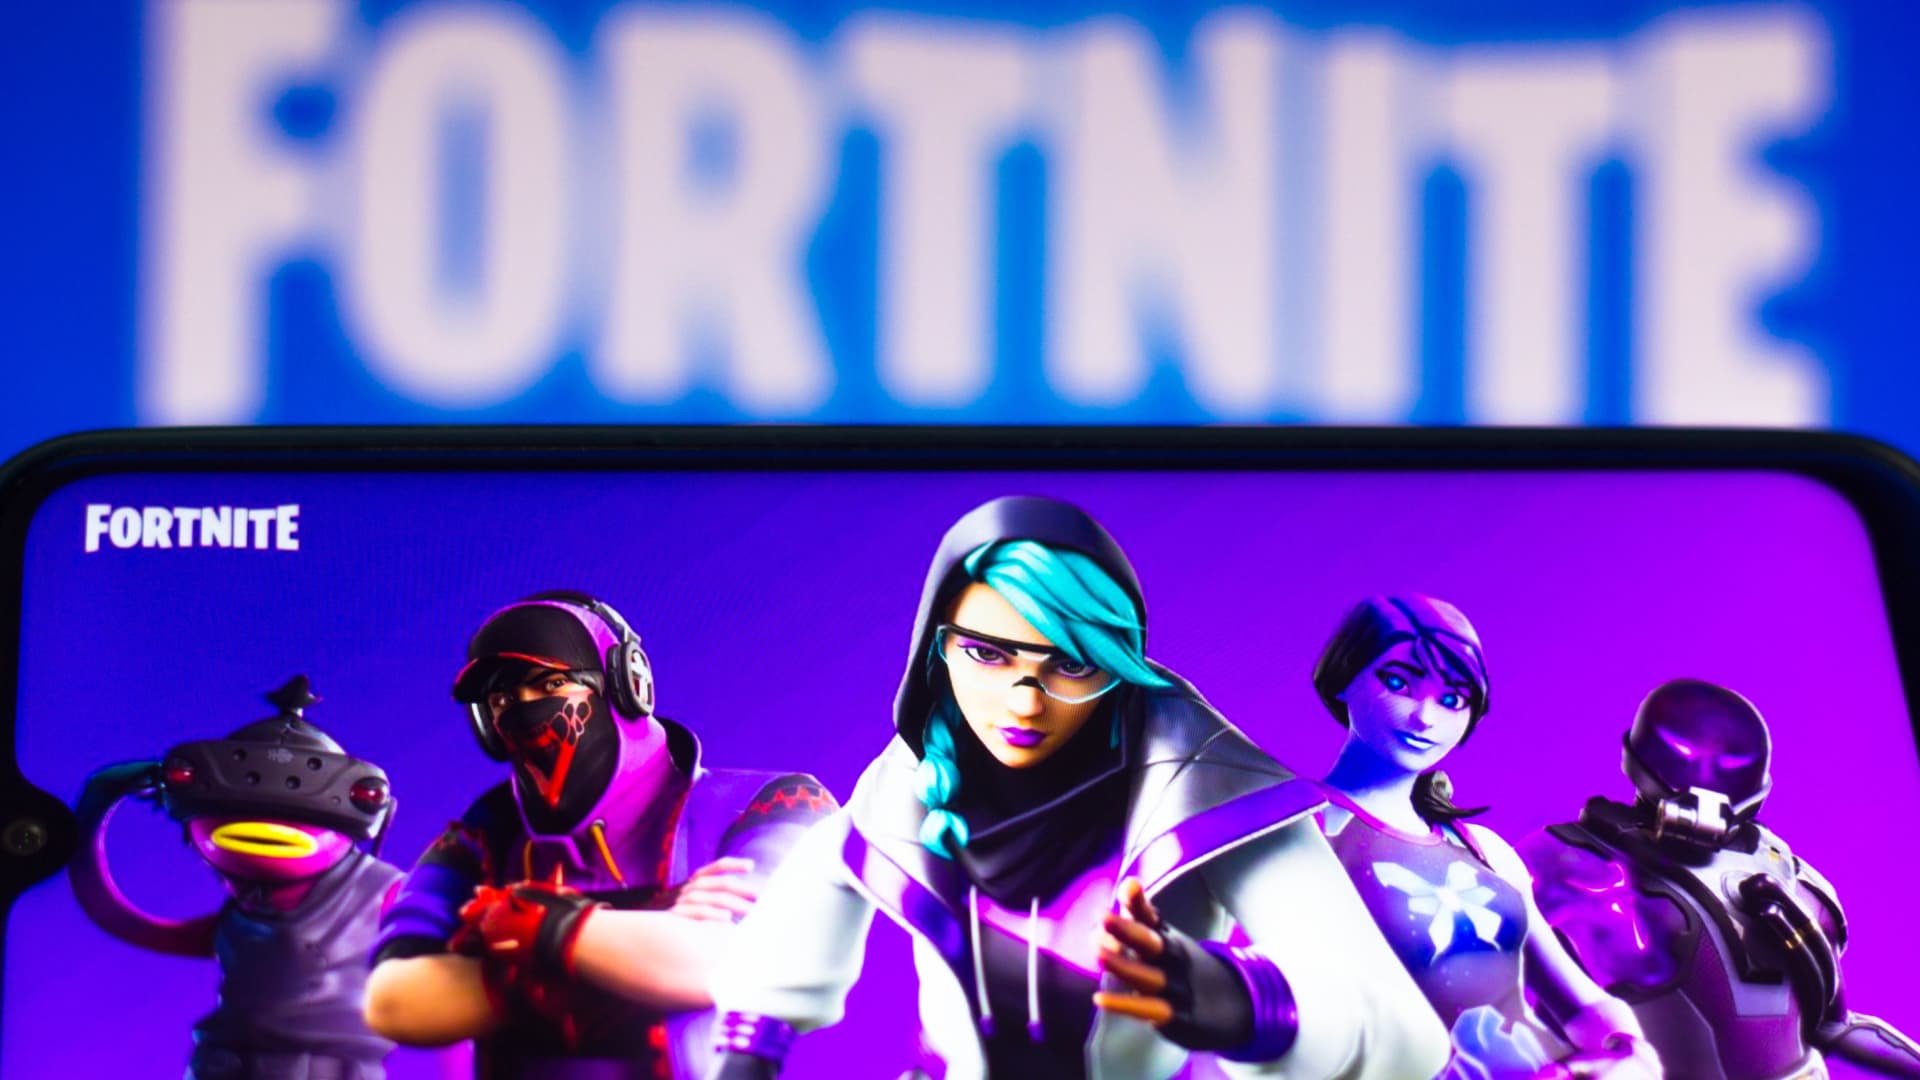 Fortnite players are getting $245 million in refunds — here's who qualifies